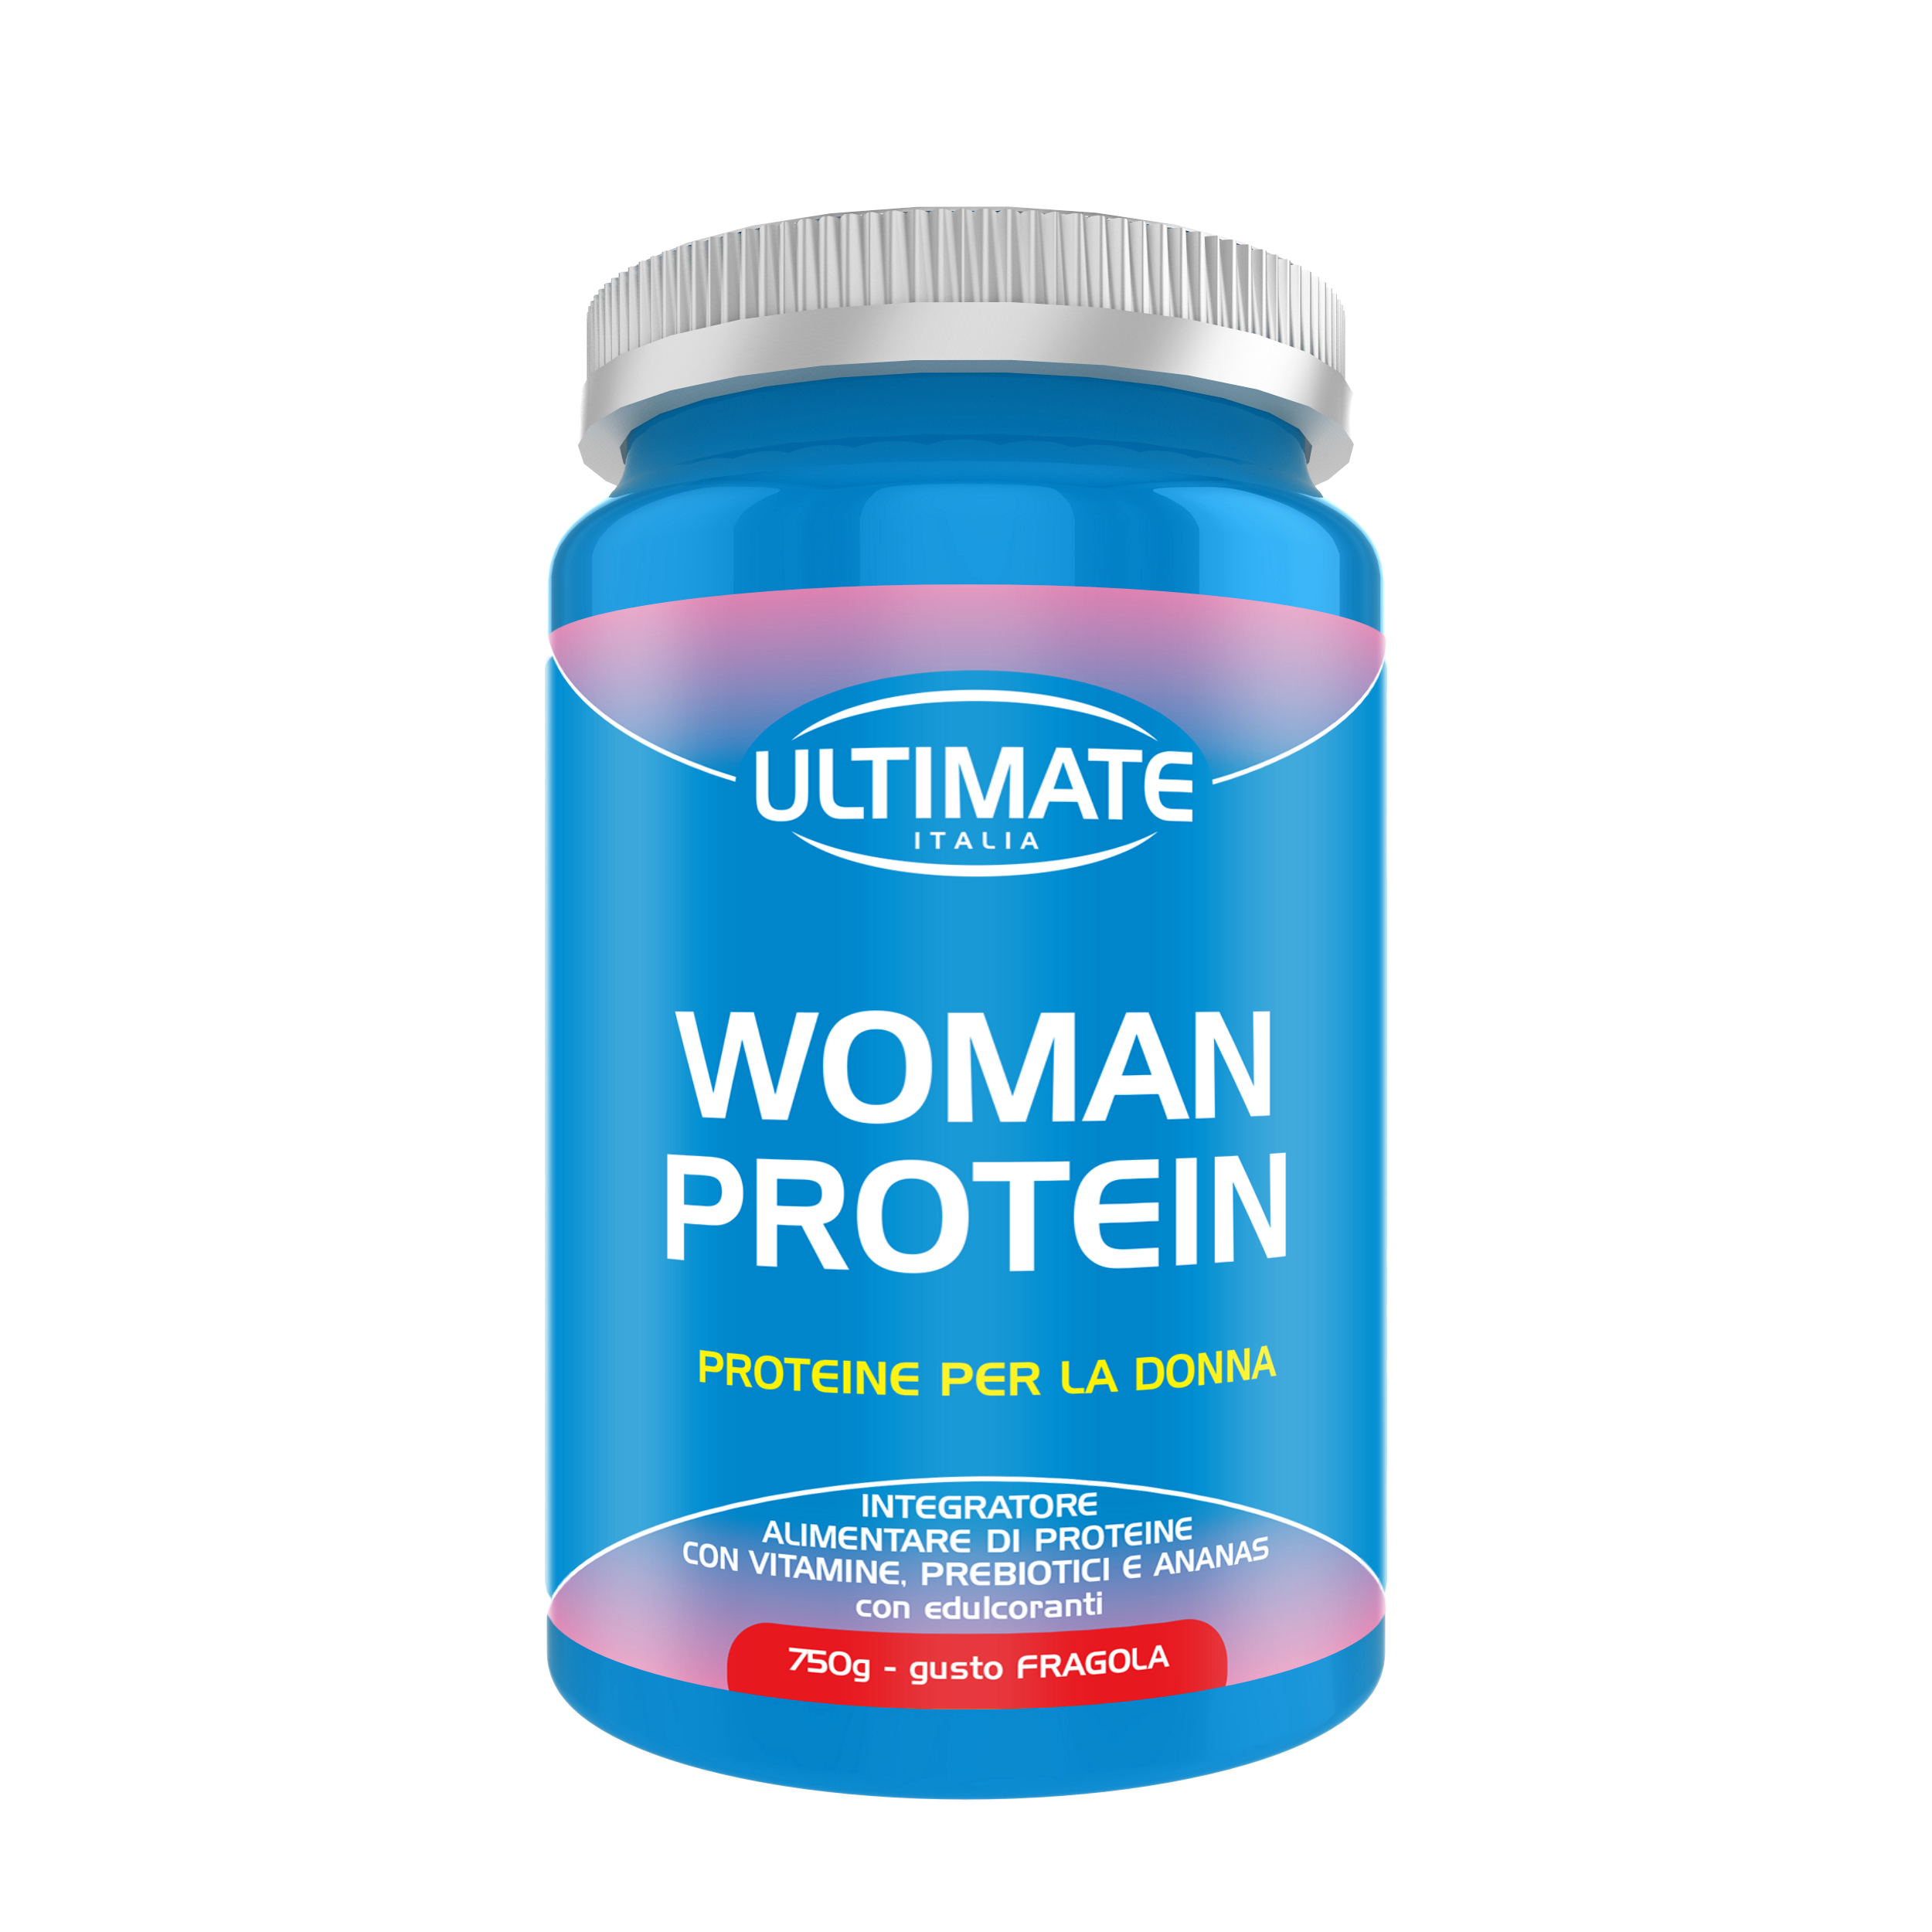 Image of Woman Protein Fragola Ultimate 750g